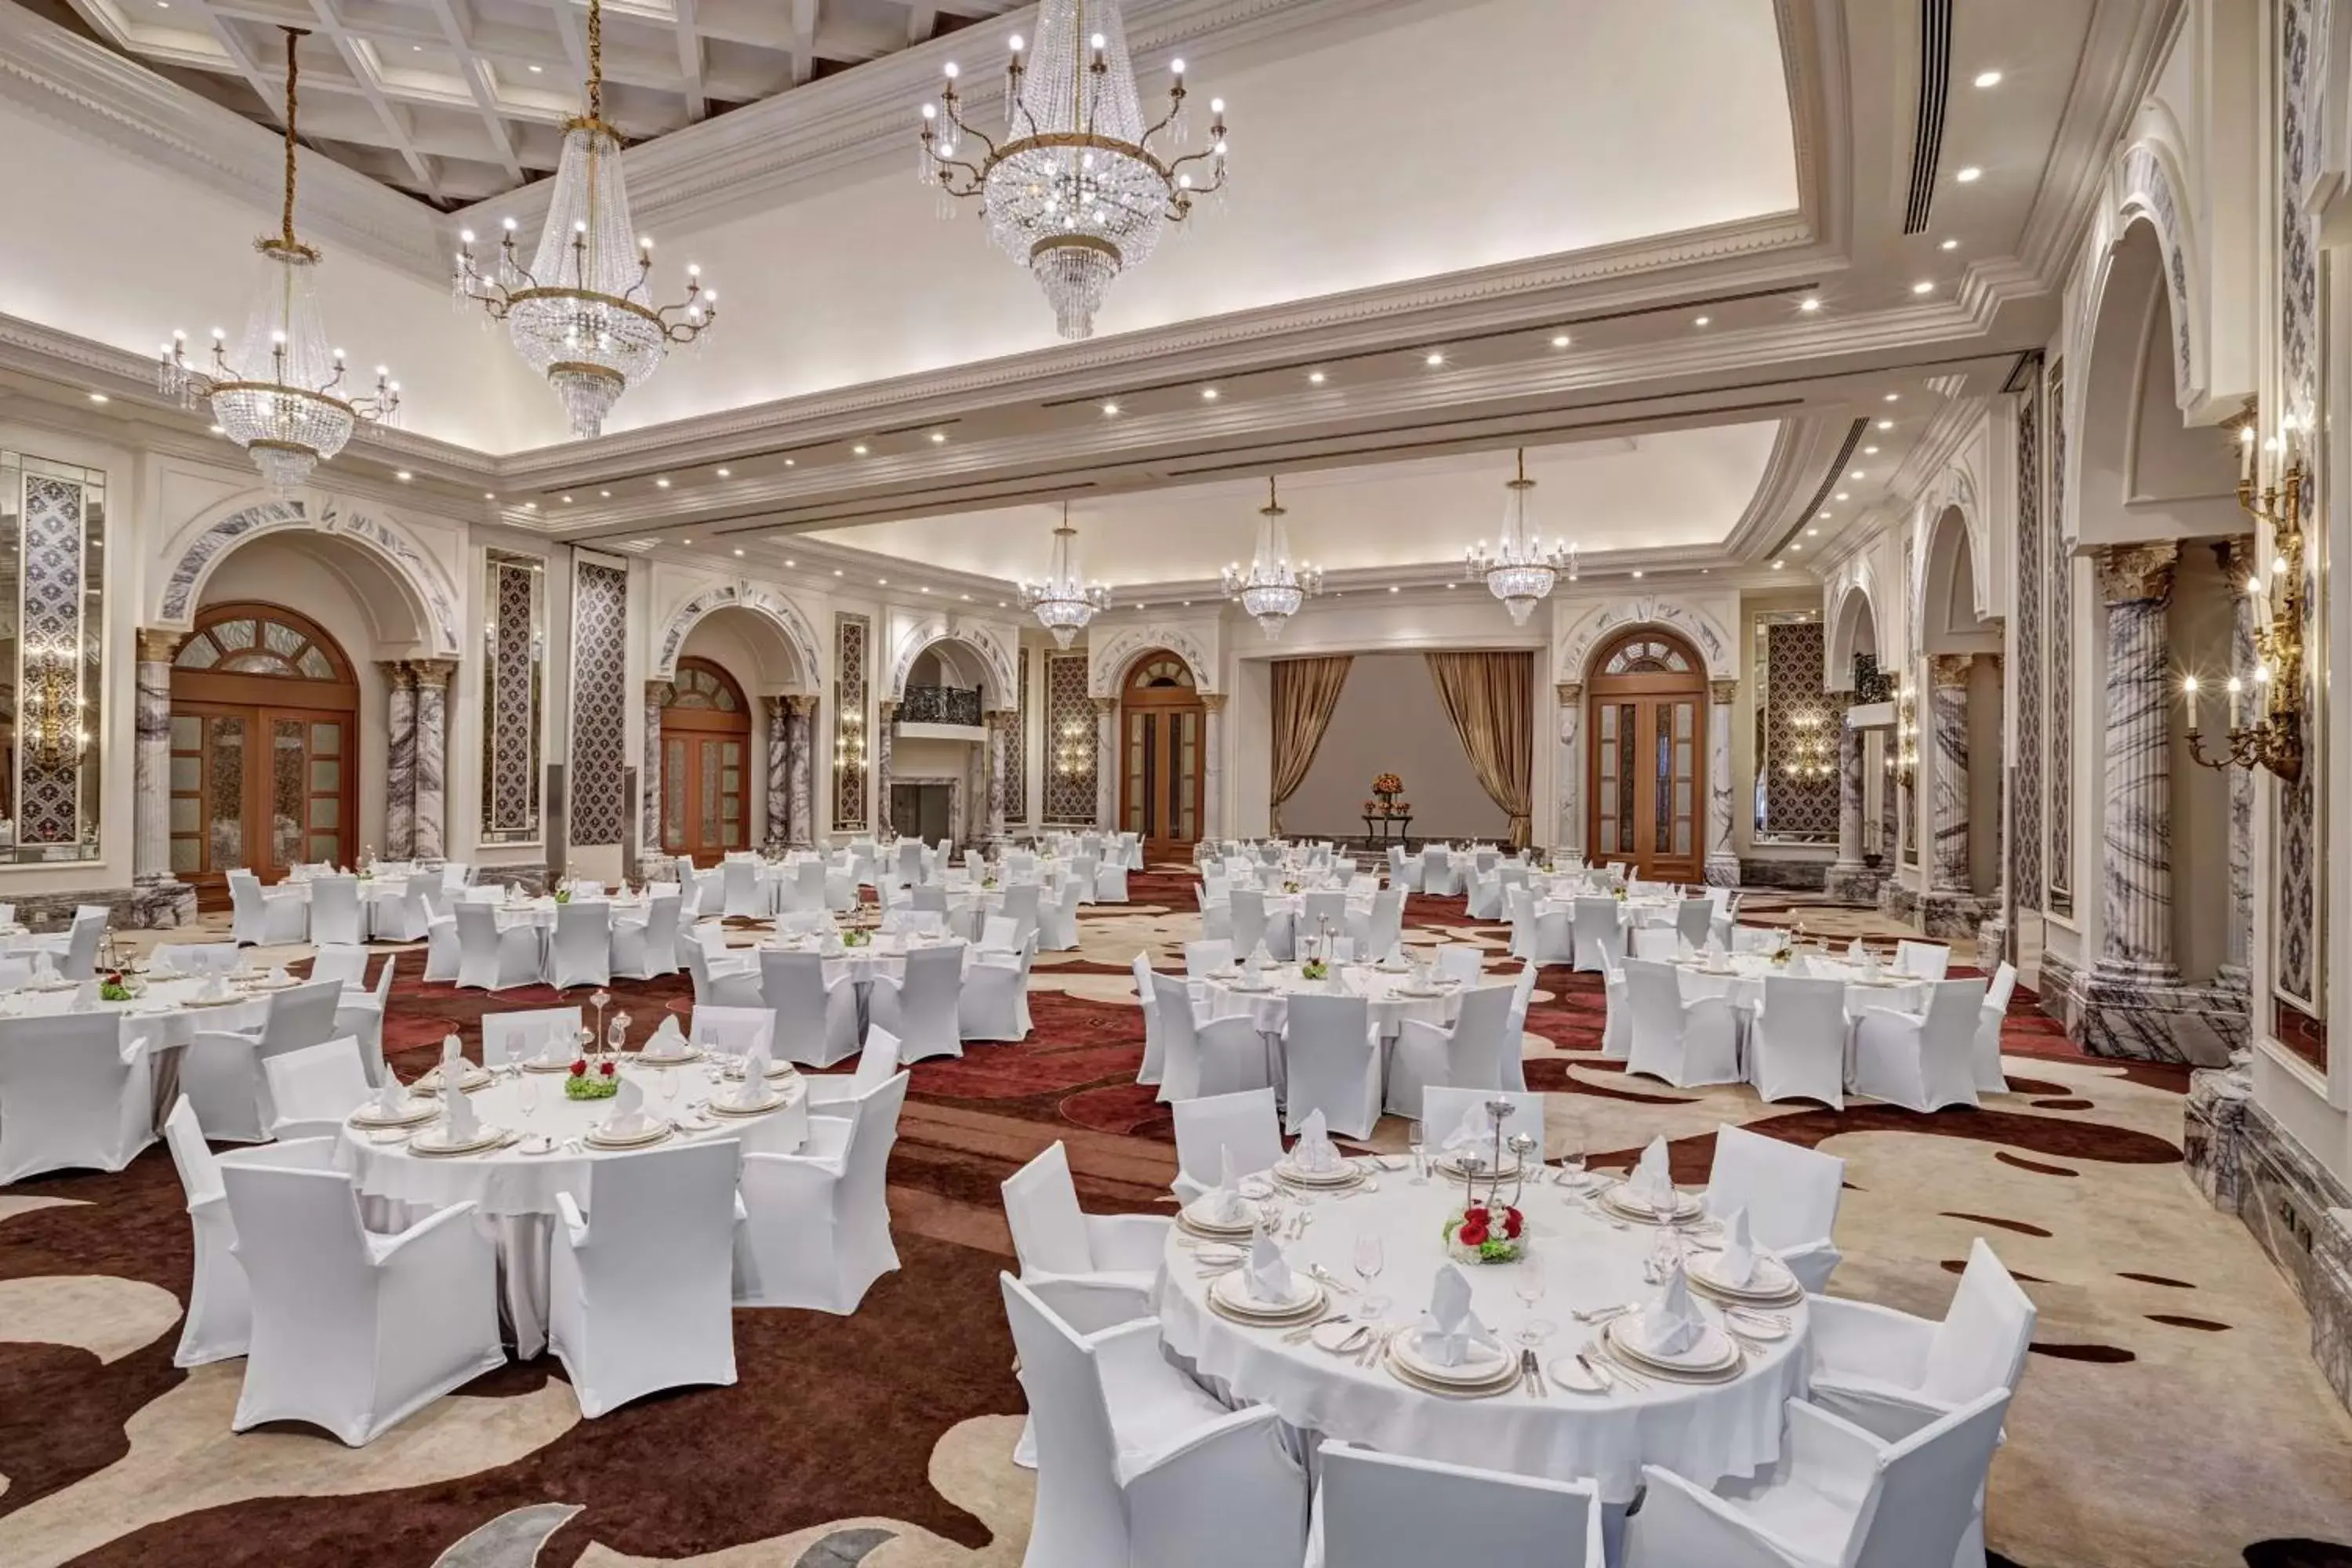 Meeting/conference room, Banquet Facilities in Habtoor Palace Dubai, LXR Hotels & Resorts